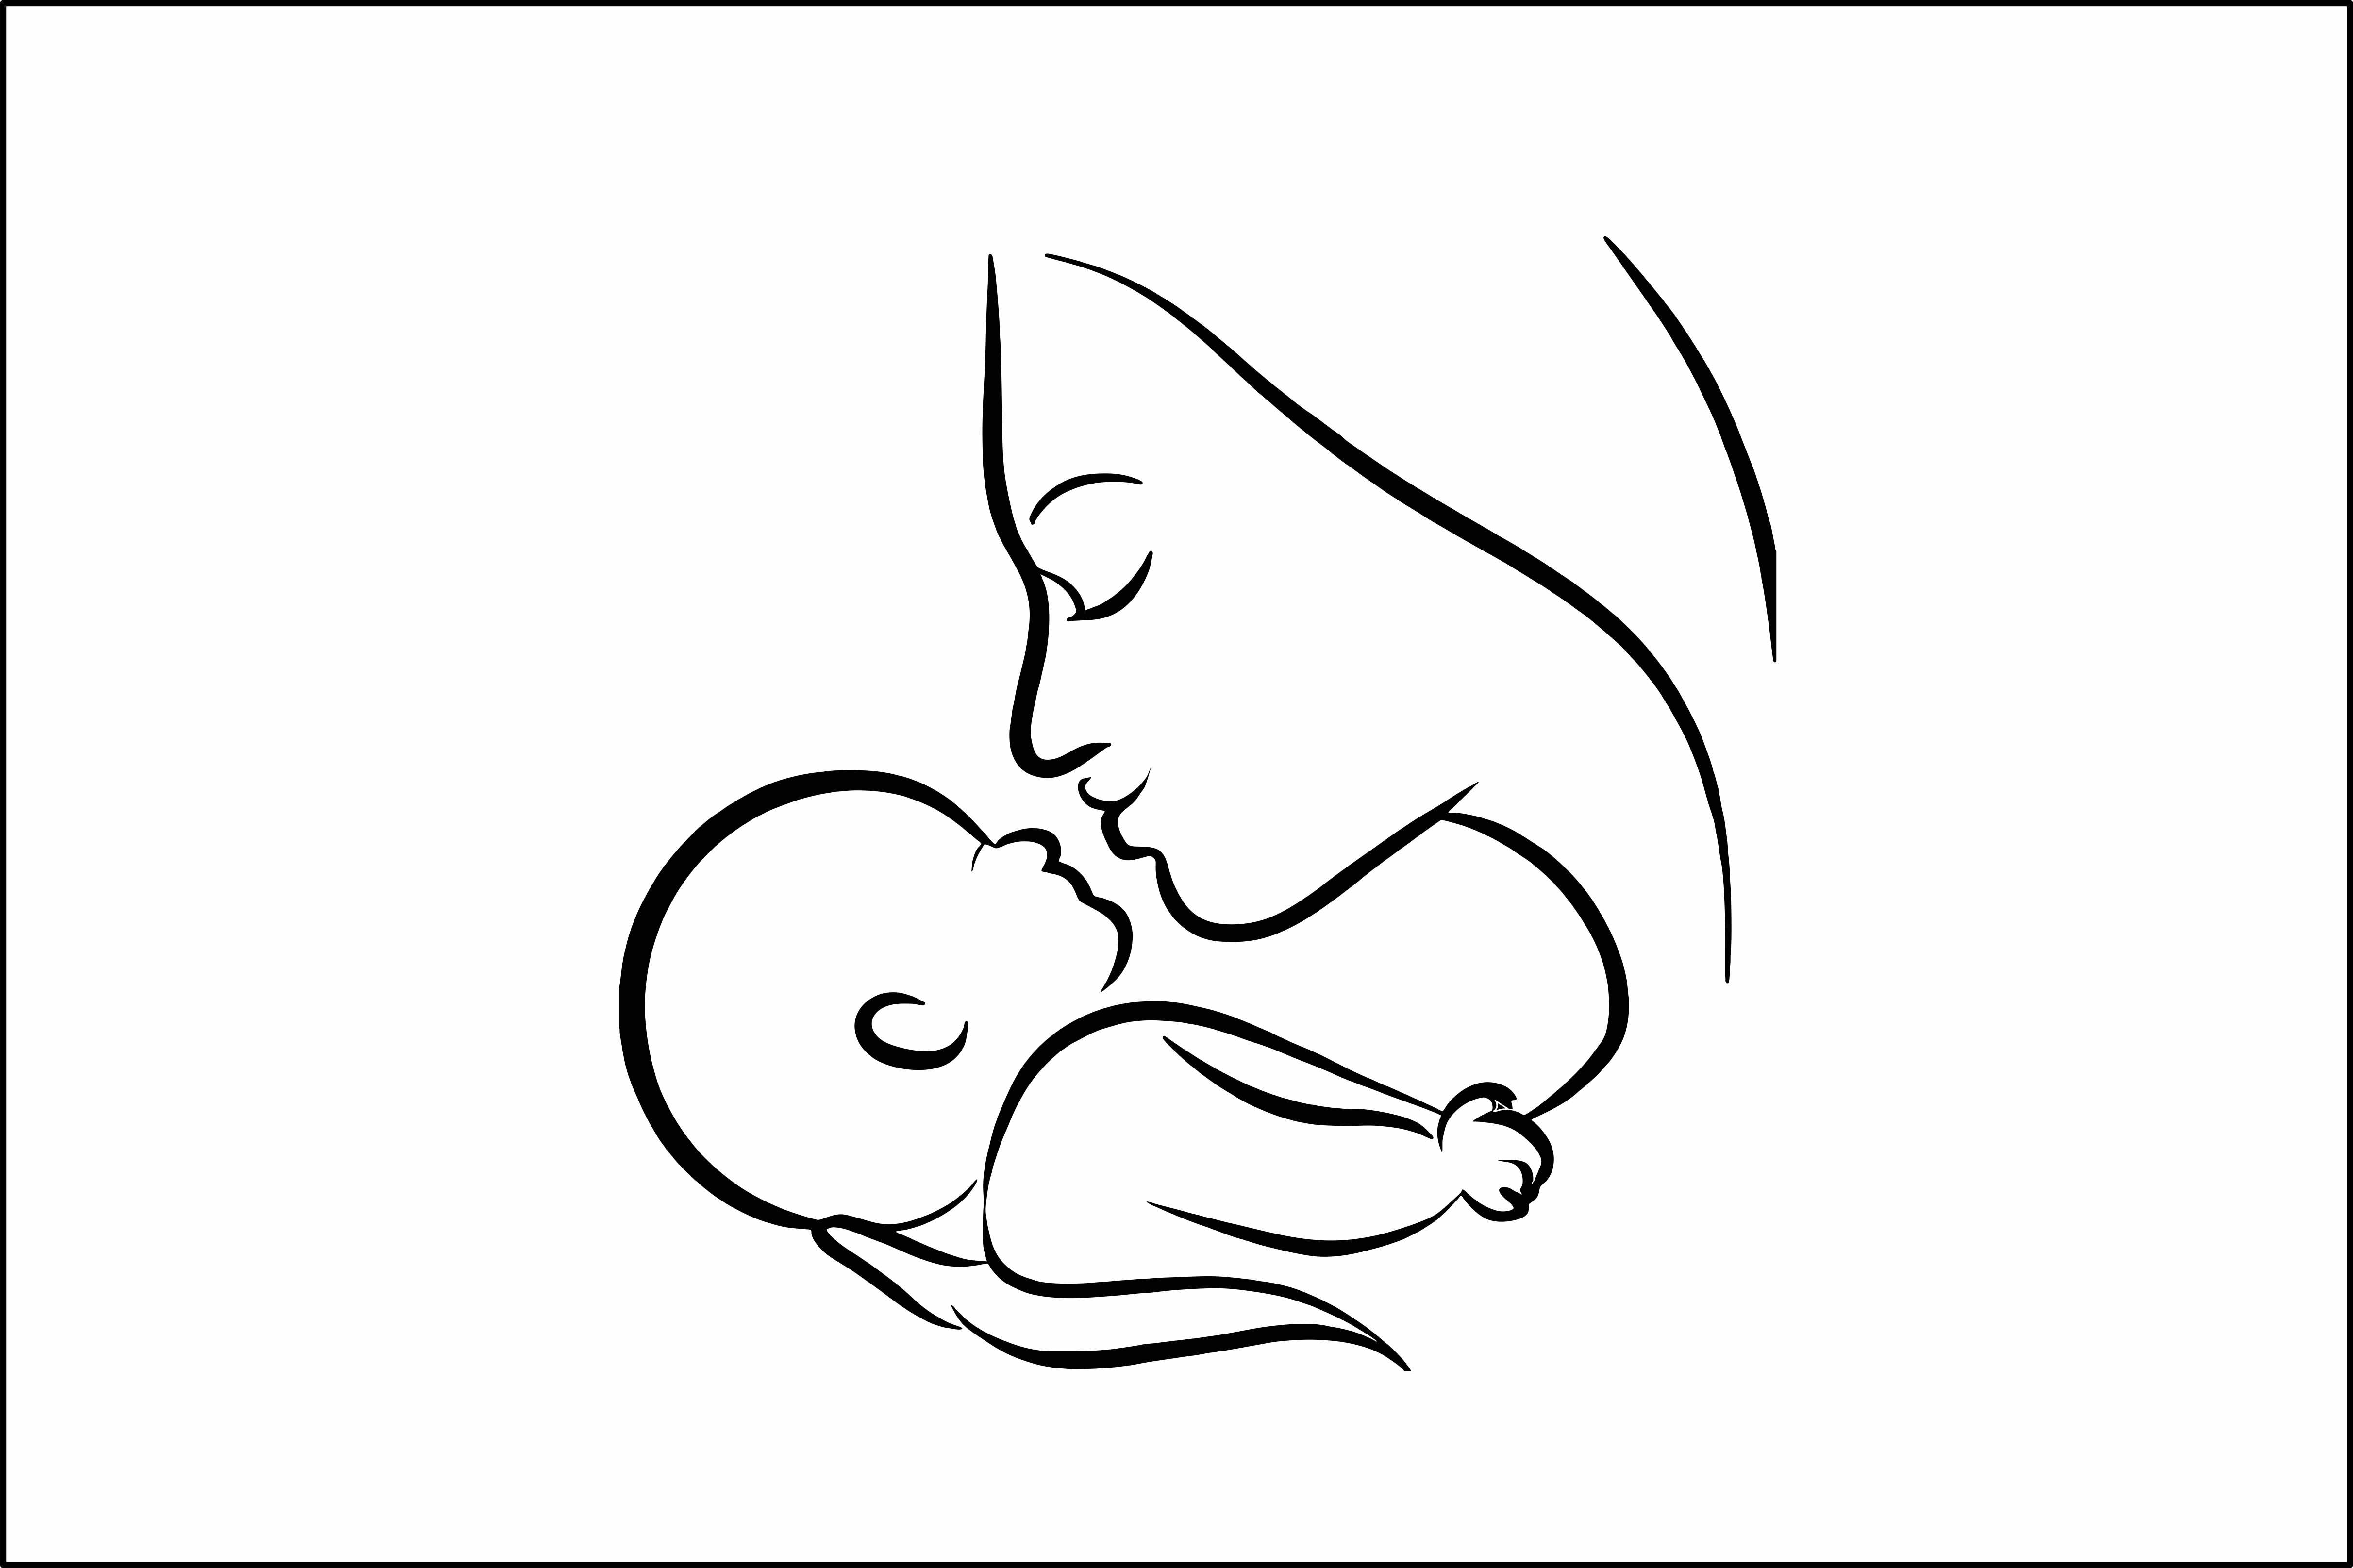 Mom and Baby Outline Line Art Vector Graphic by Screech Owl Supply ...